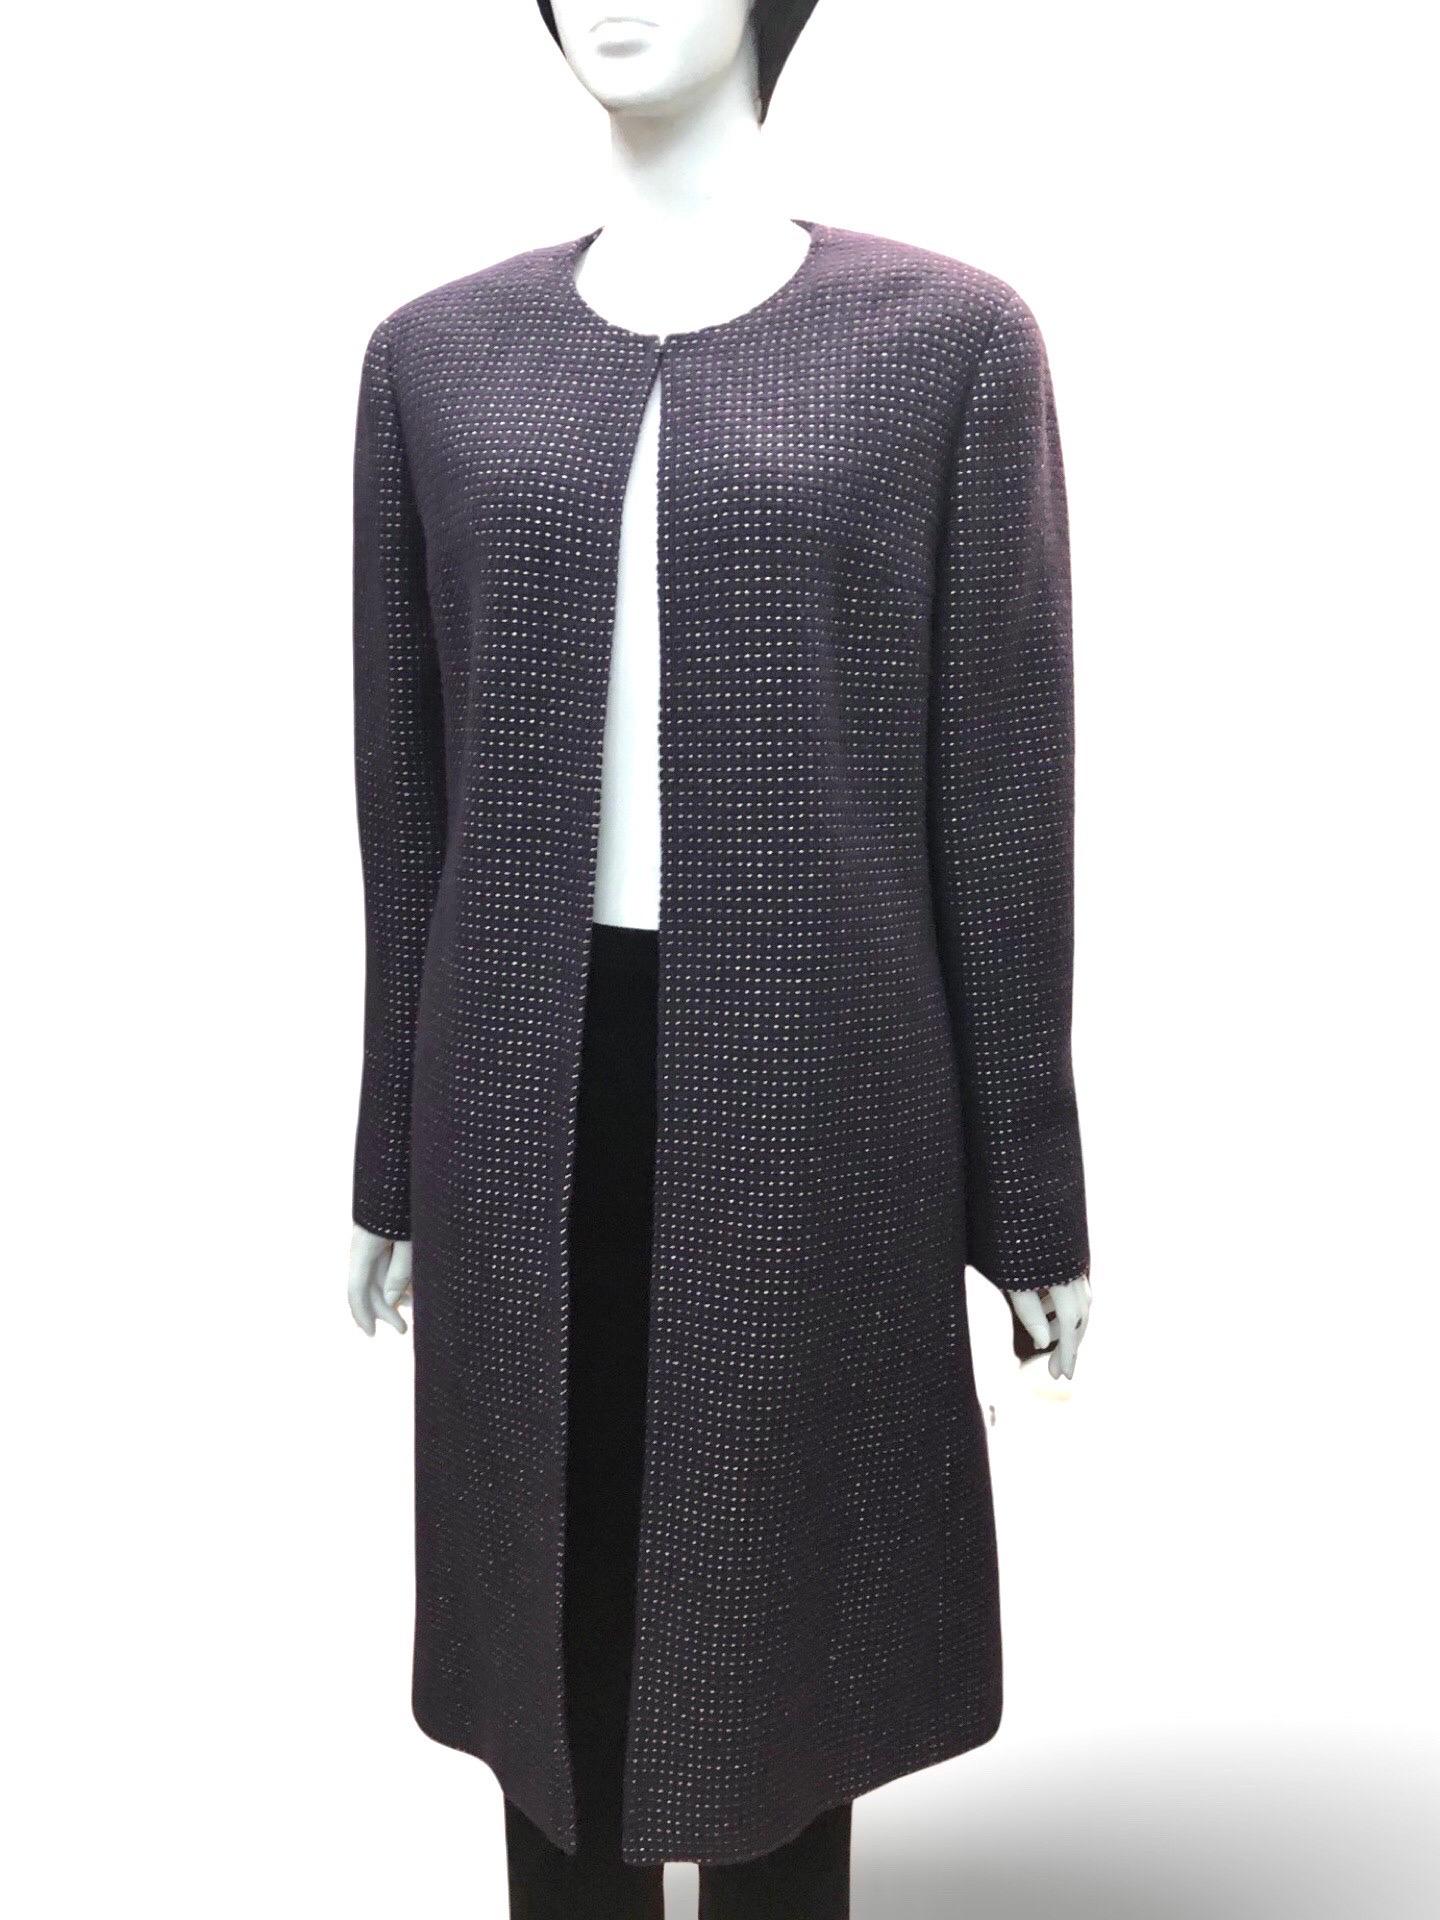 - Chanel purple and gold tweed collarless wool coat from autumn/winter 2000 collection. 

- Hook closure. 

- CC Hardware cuff. 

- Size 42. 